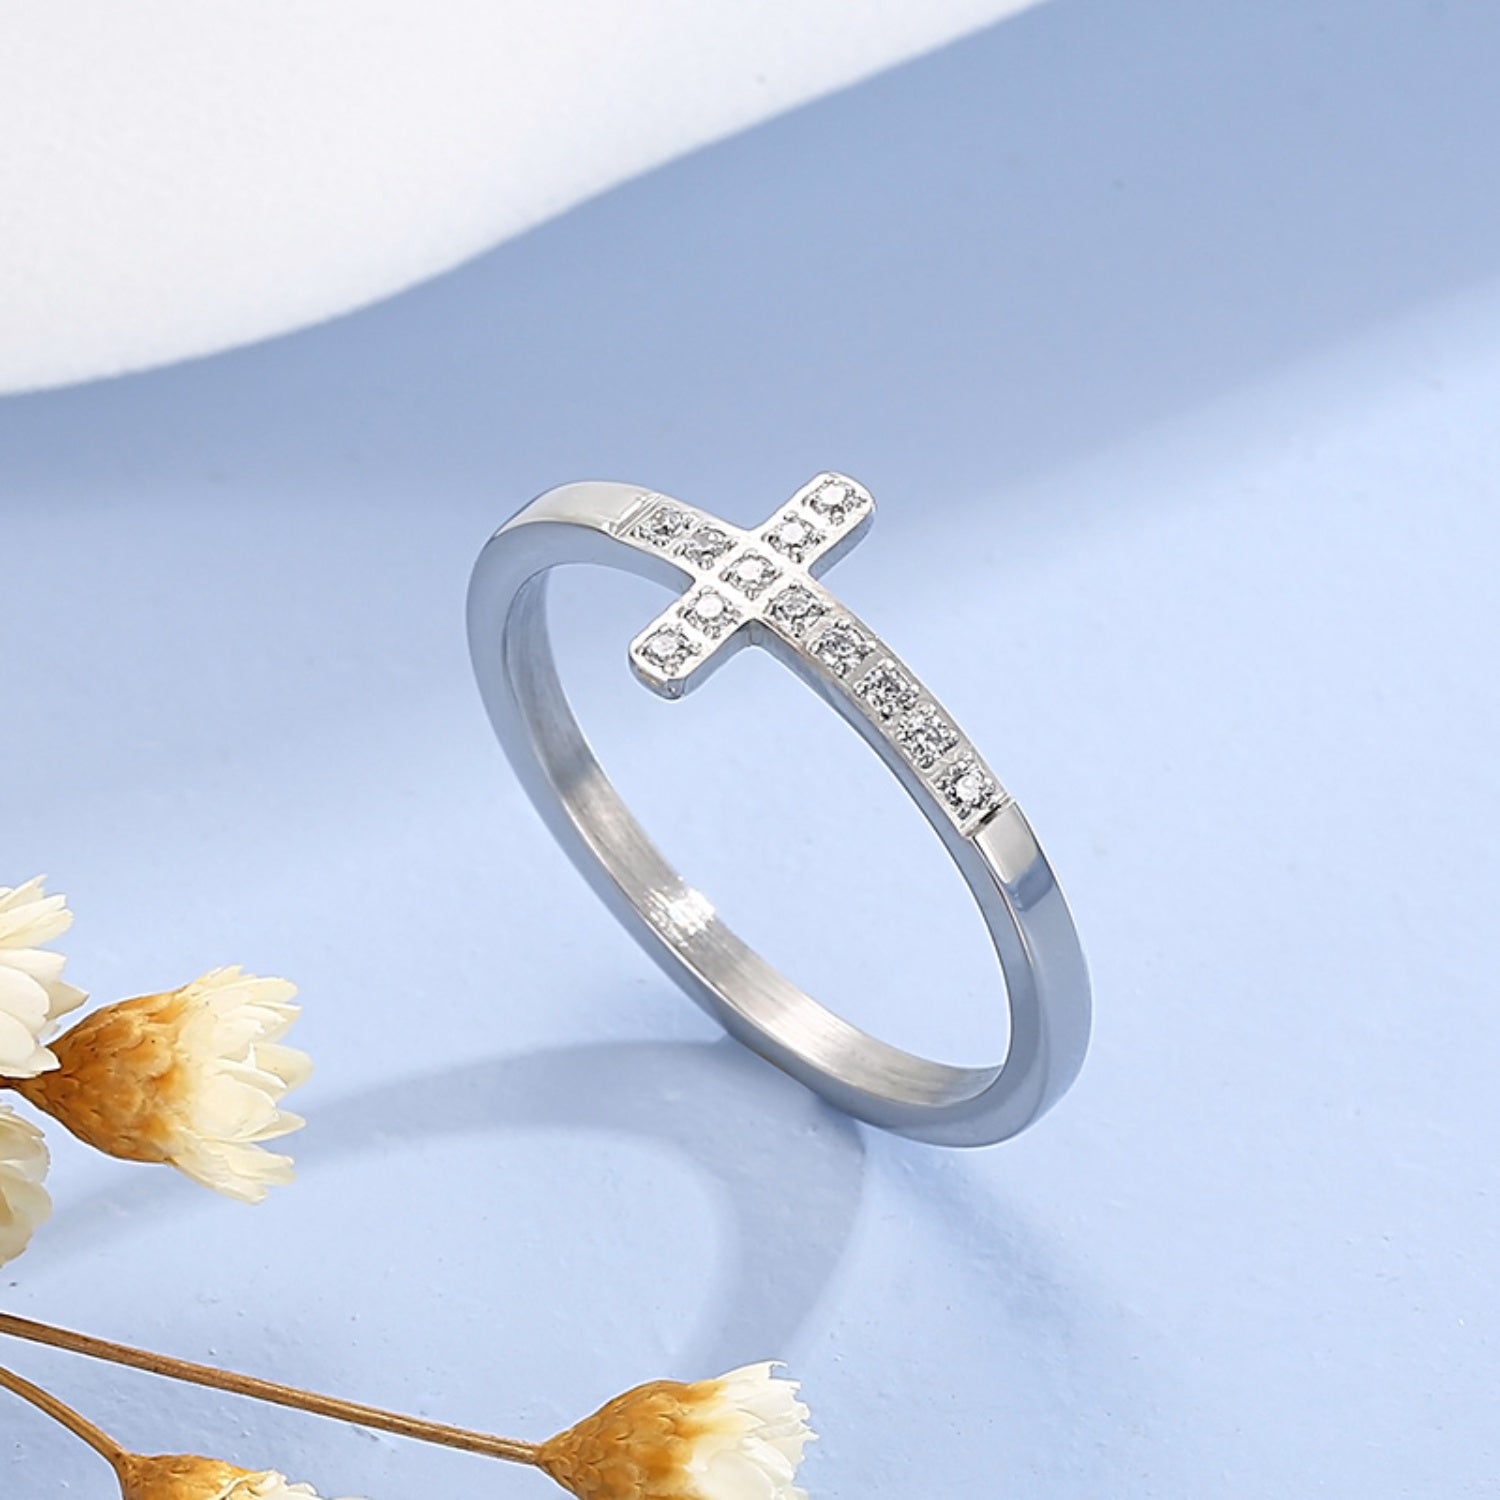 Inlaid Zircon Stainless Steel Cross Ring - Tophatter Shopping Deals - Electronics, Jewelry, Beauty, Health, Gadgets, Fashion